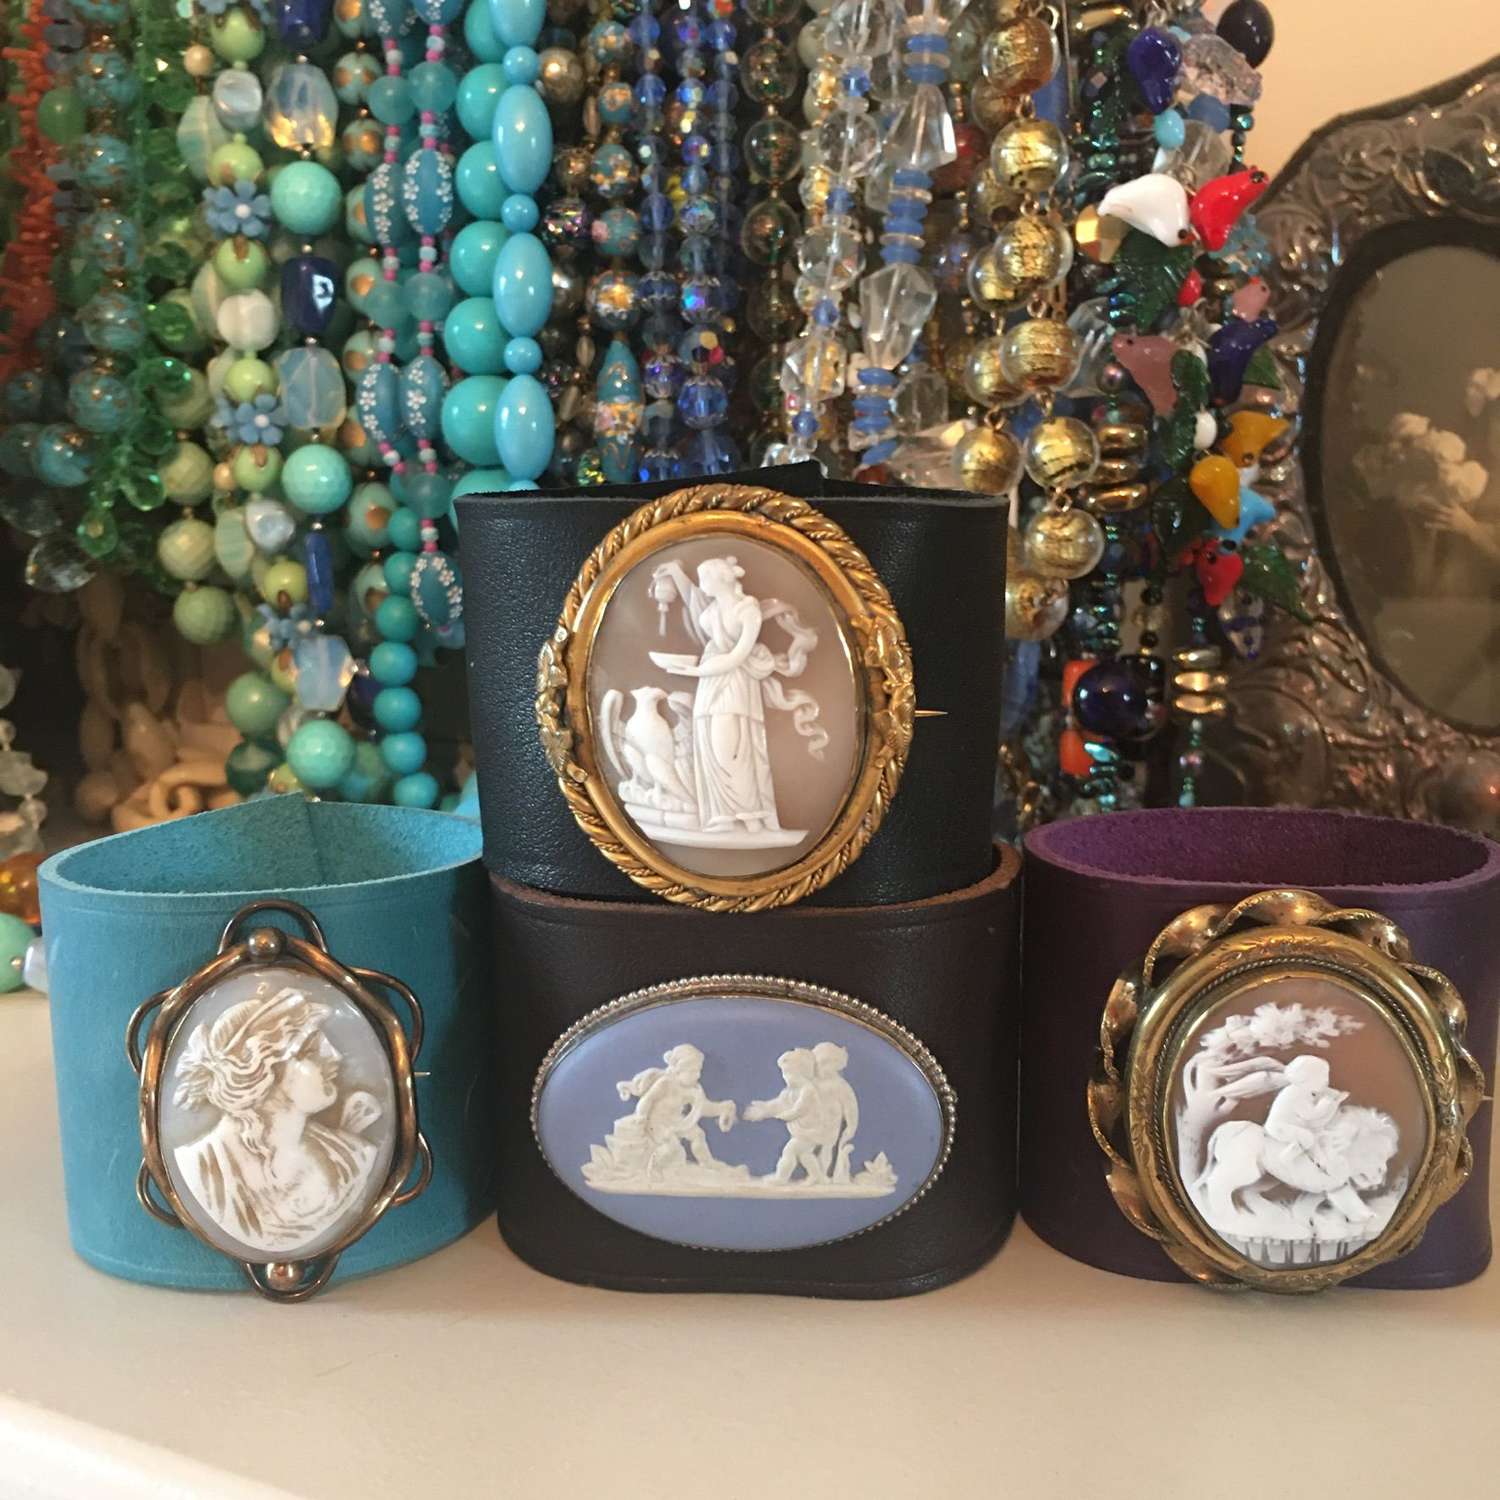 Antique and vintage cameos on leather bracelets